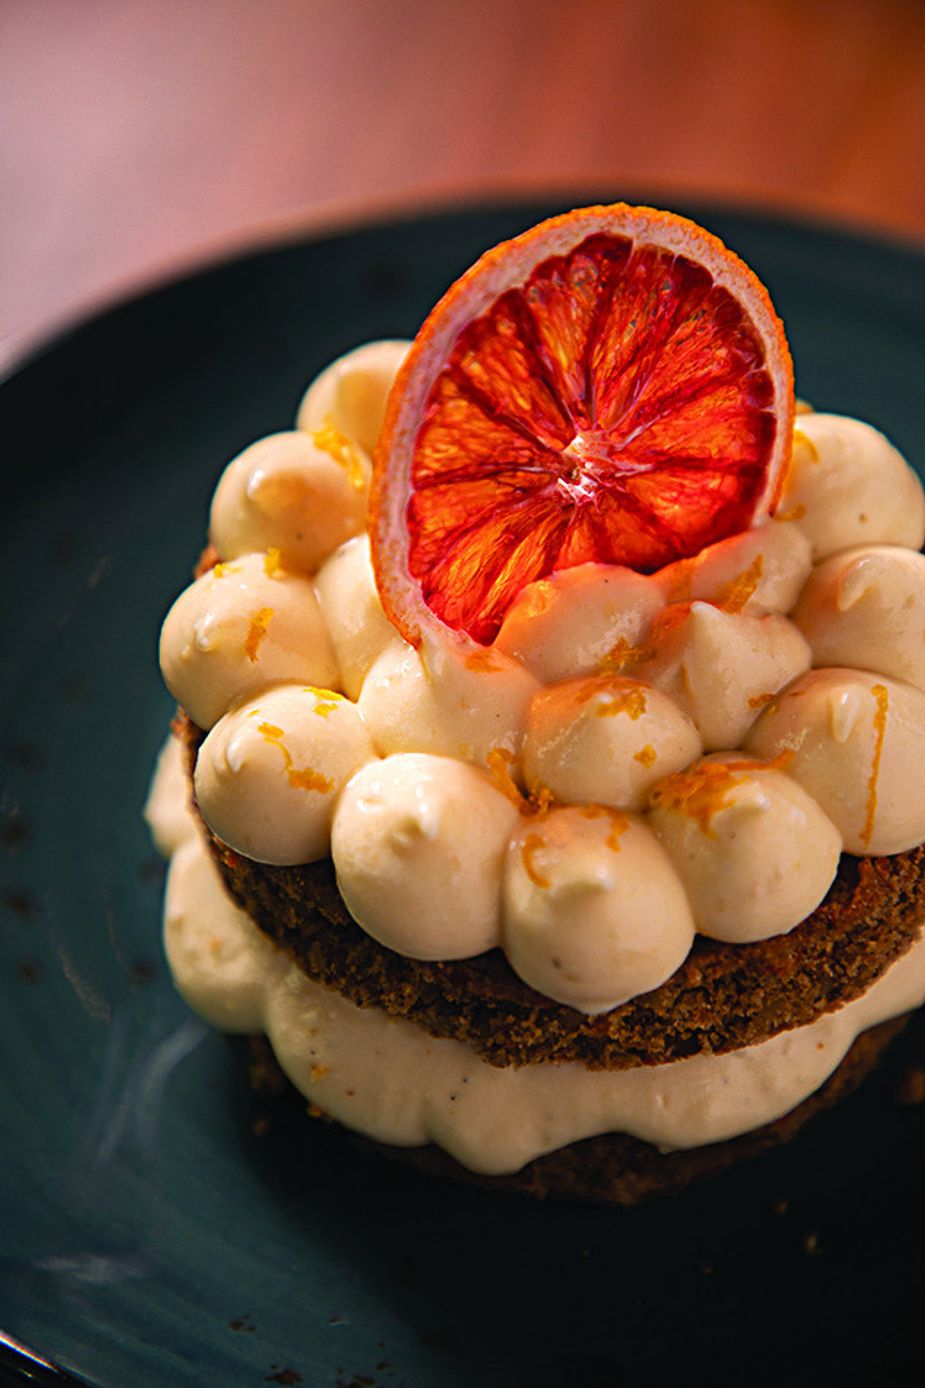 Bourbon carrot cake with brown-butter mascarpone frosting is one of many desserts that are a hit with diners. Photo by Lori Duckworth